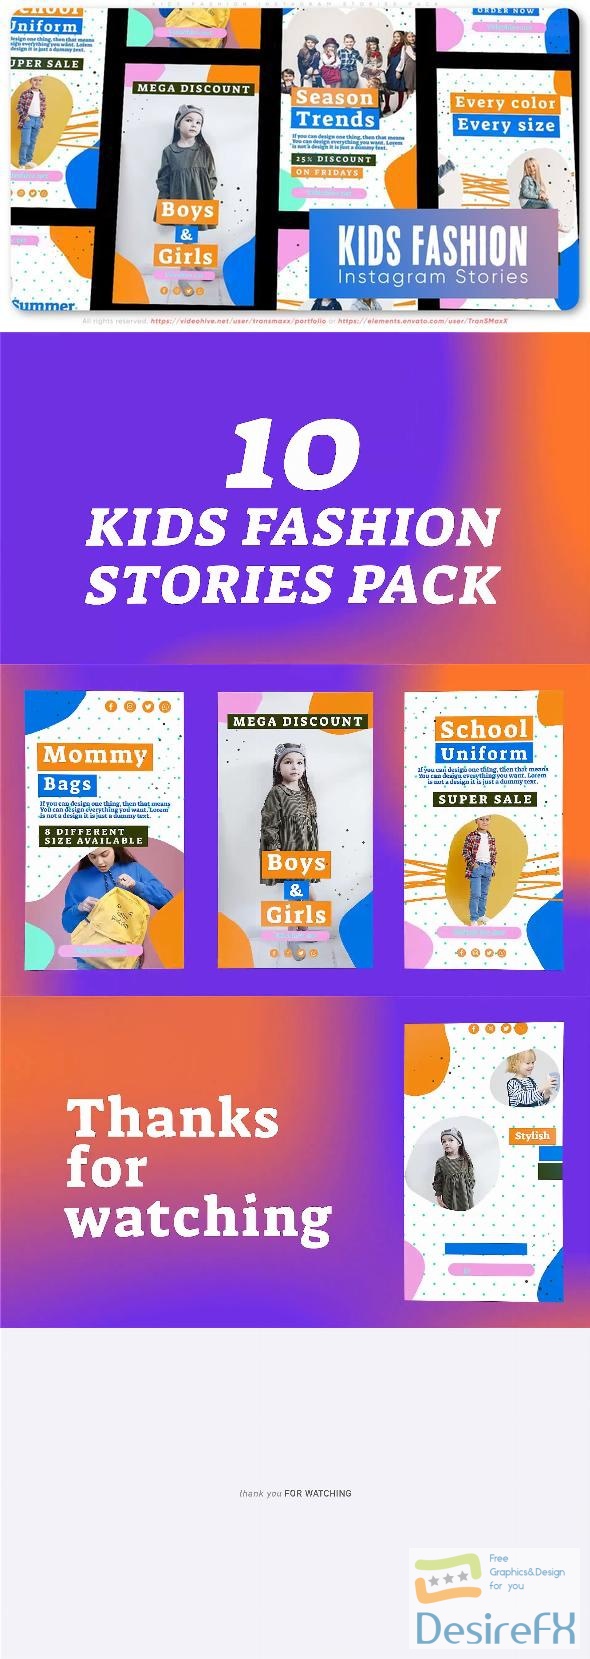 VideoHive Kids Fashion Instagram Stories Pack 46094110